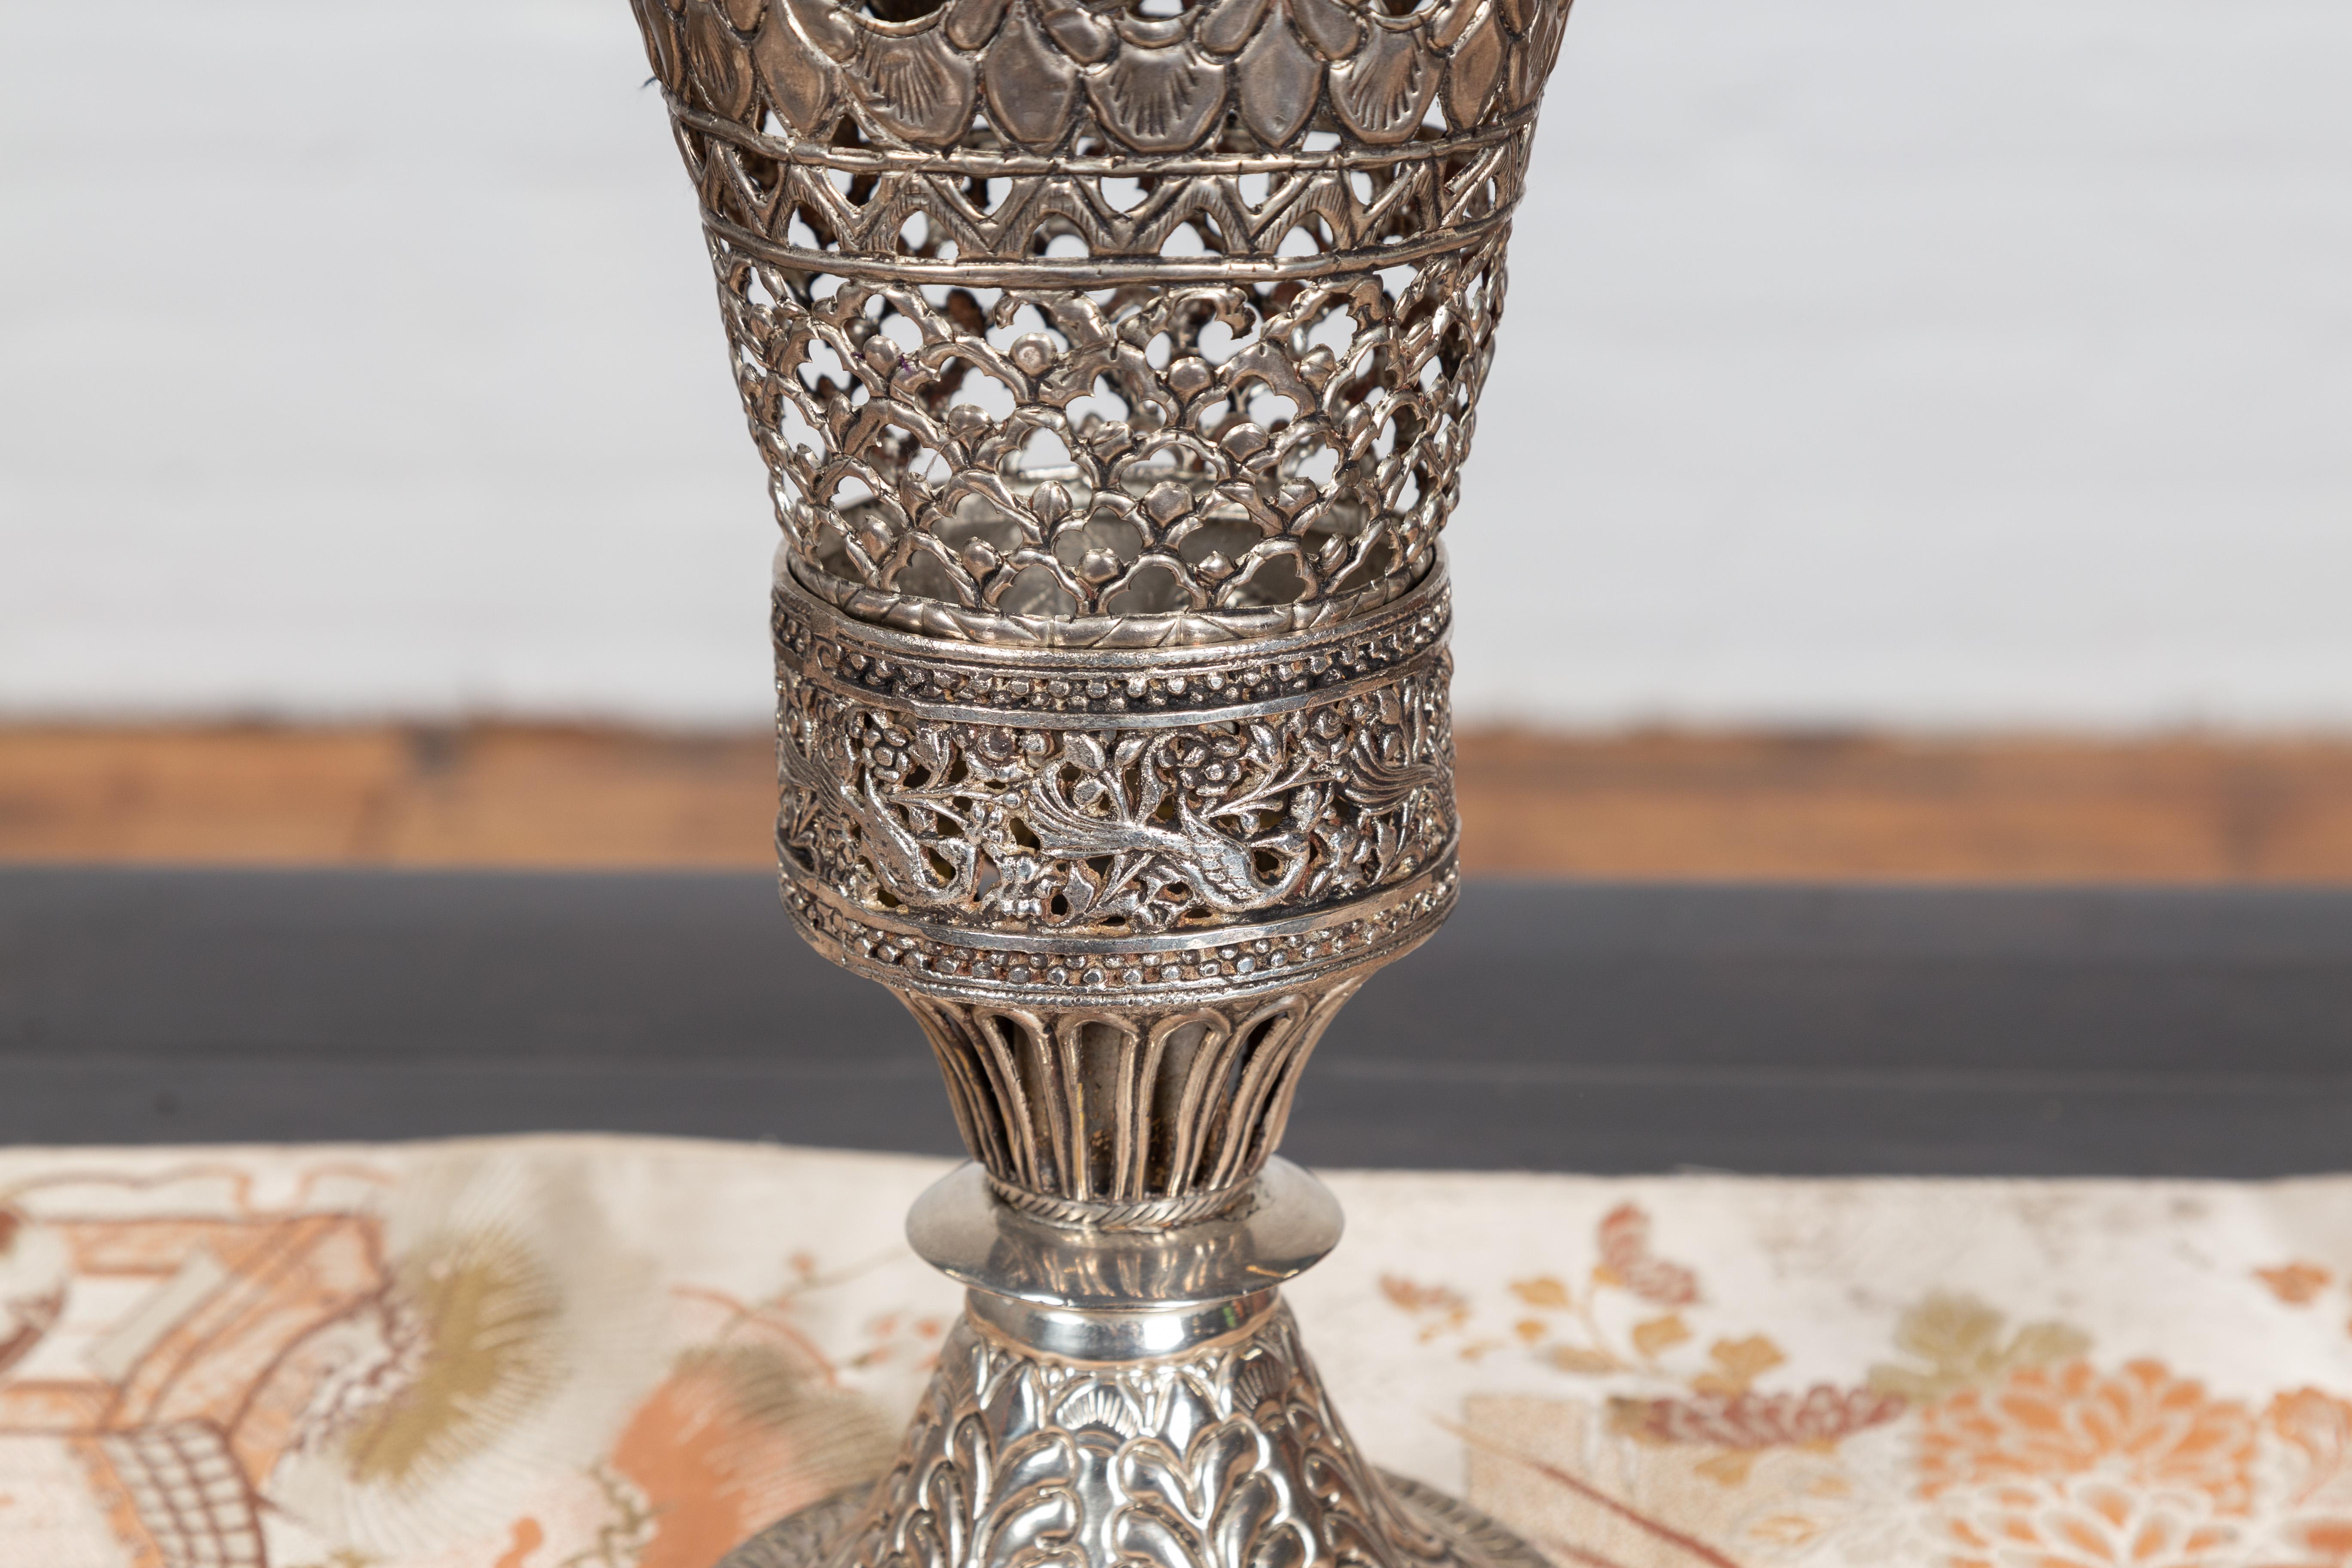 Indian Vintage Silverplate Brass Covered Candle Holder with Open Fretwork 2